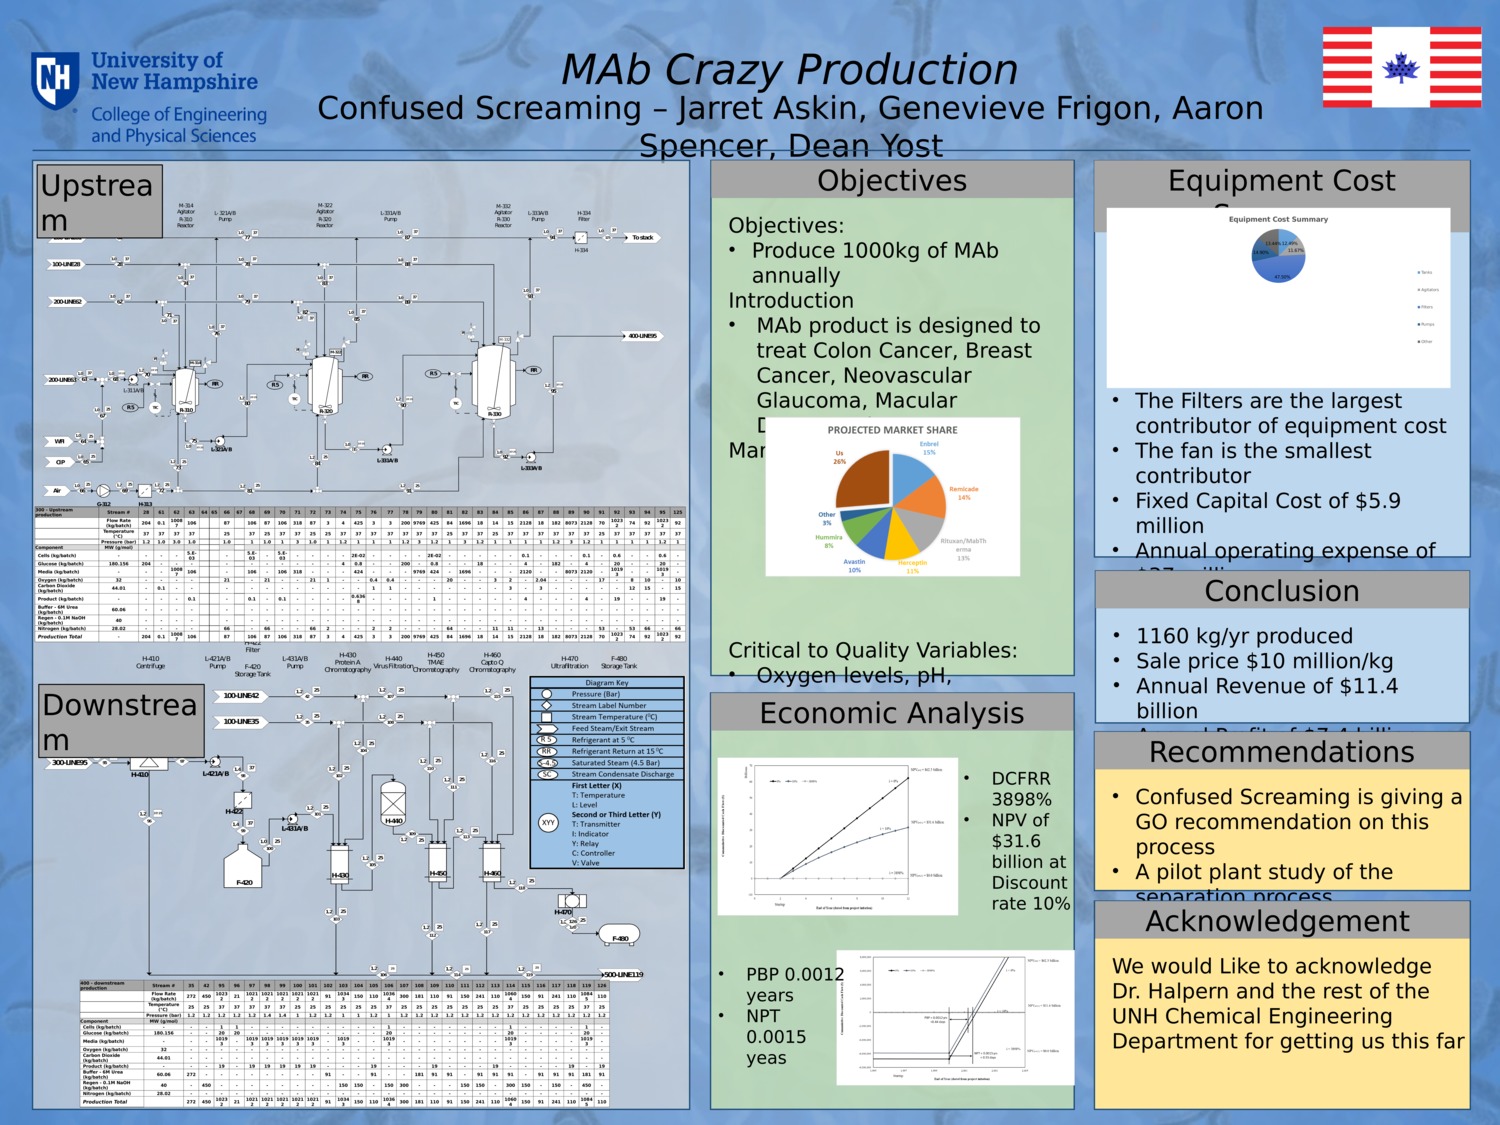 Mab Crazy Production by DeanYost